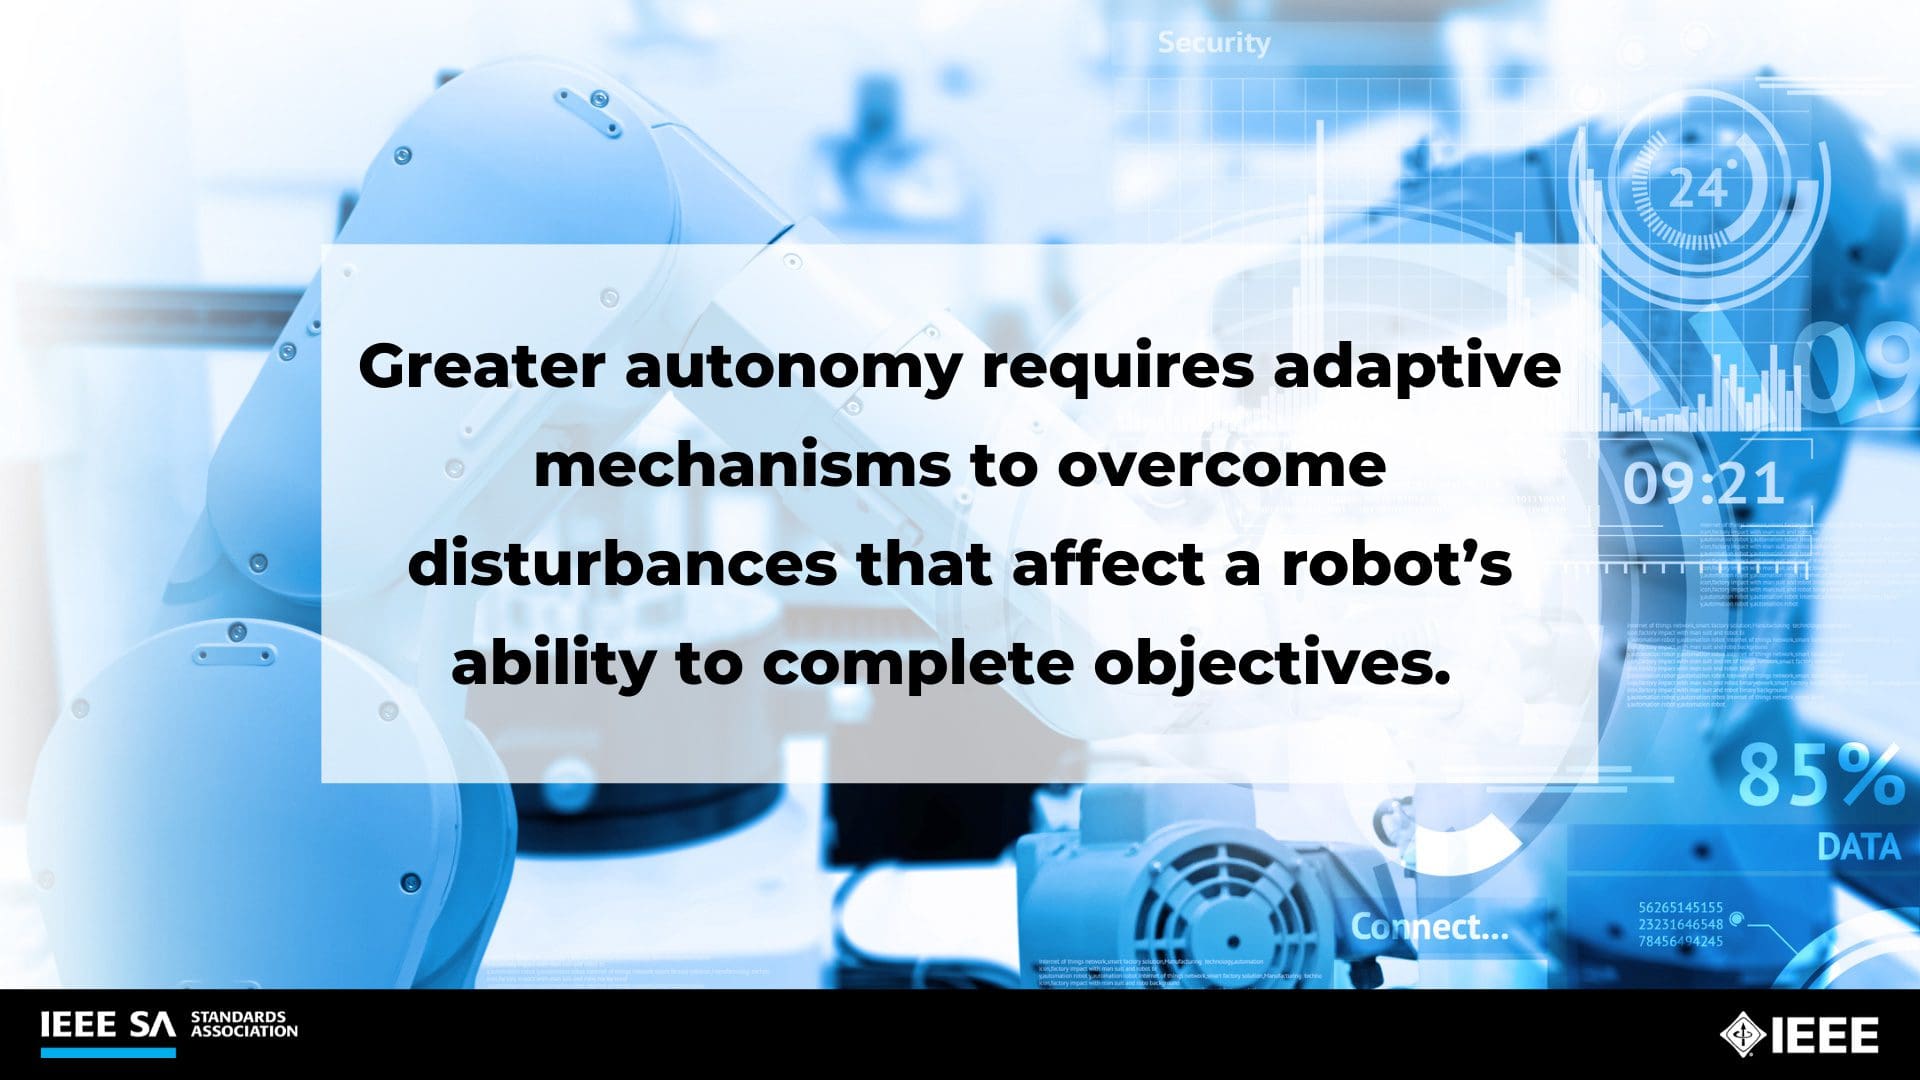 Photo of robotic arm. Text reads "Greater autonomy requires adaptive mechanisms to overcome disturbances that affect a robot's ability to complete objectives.